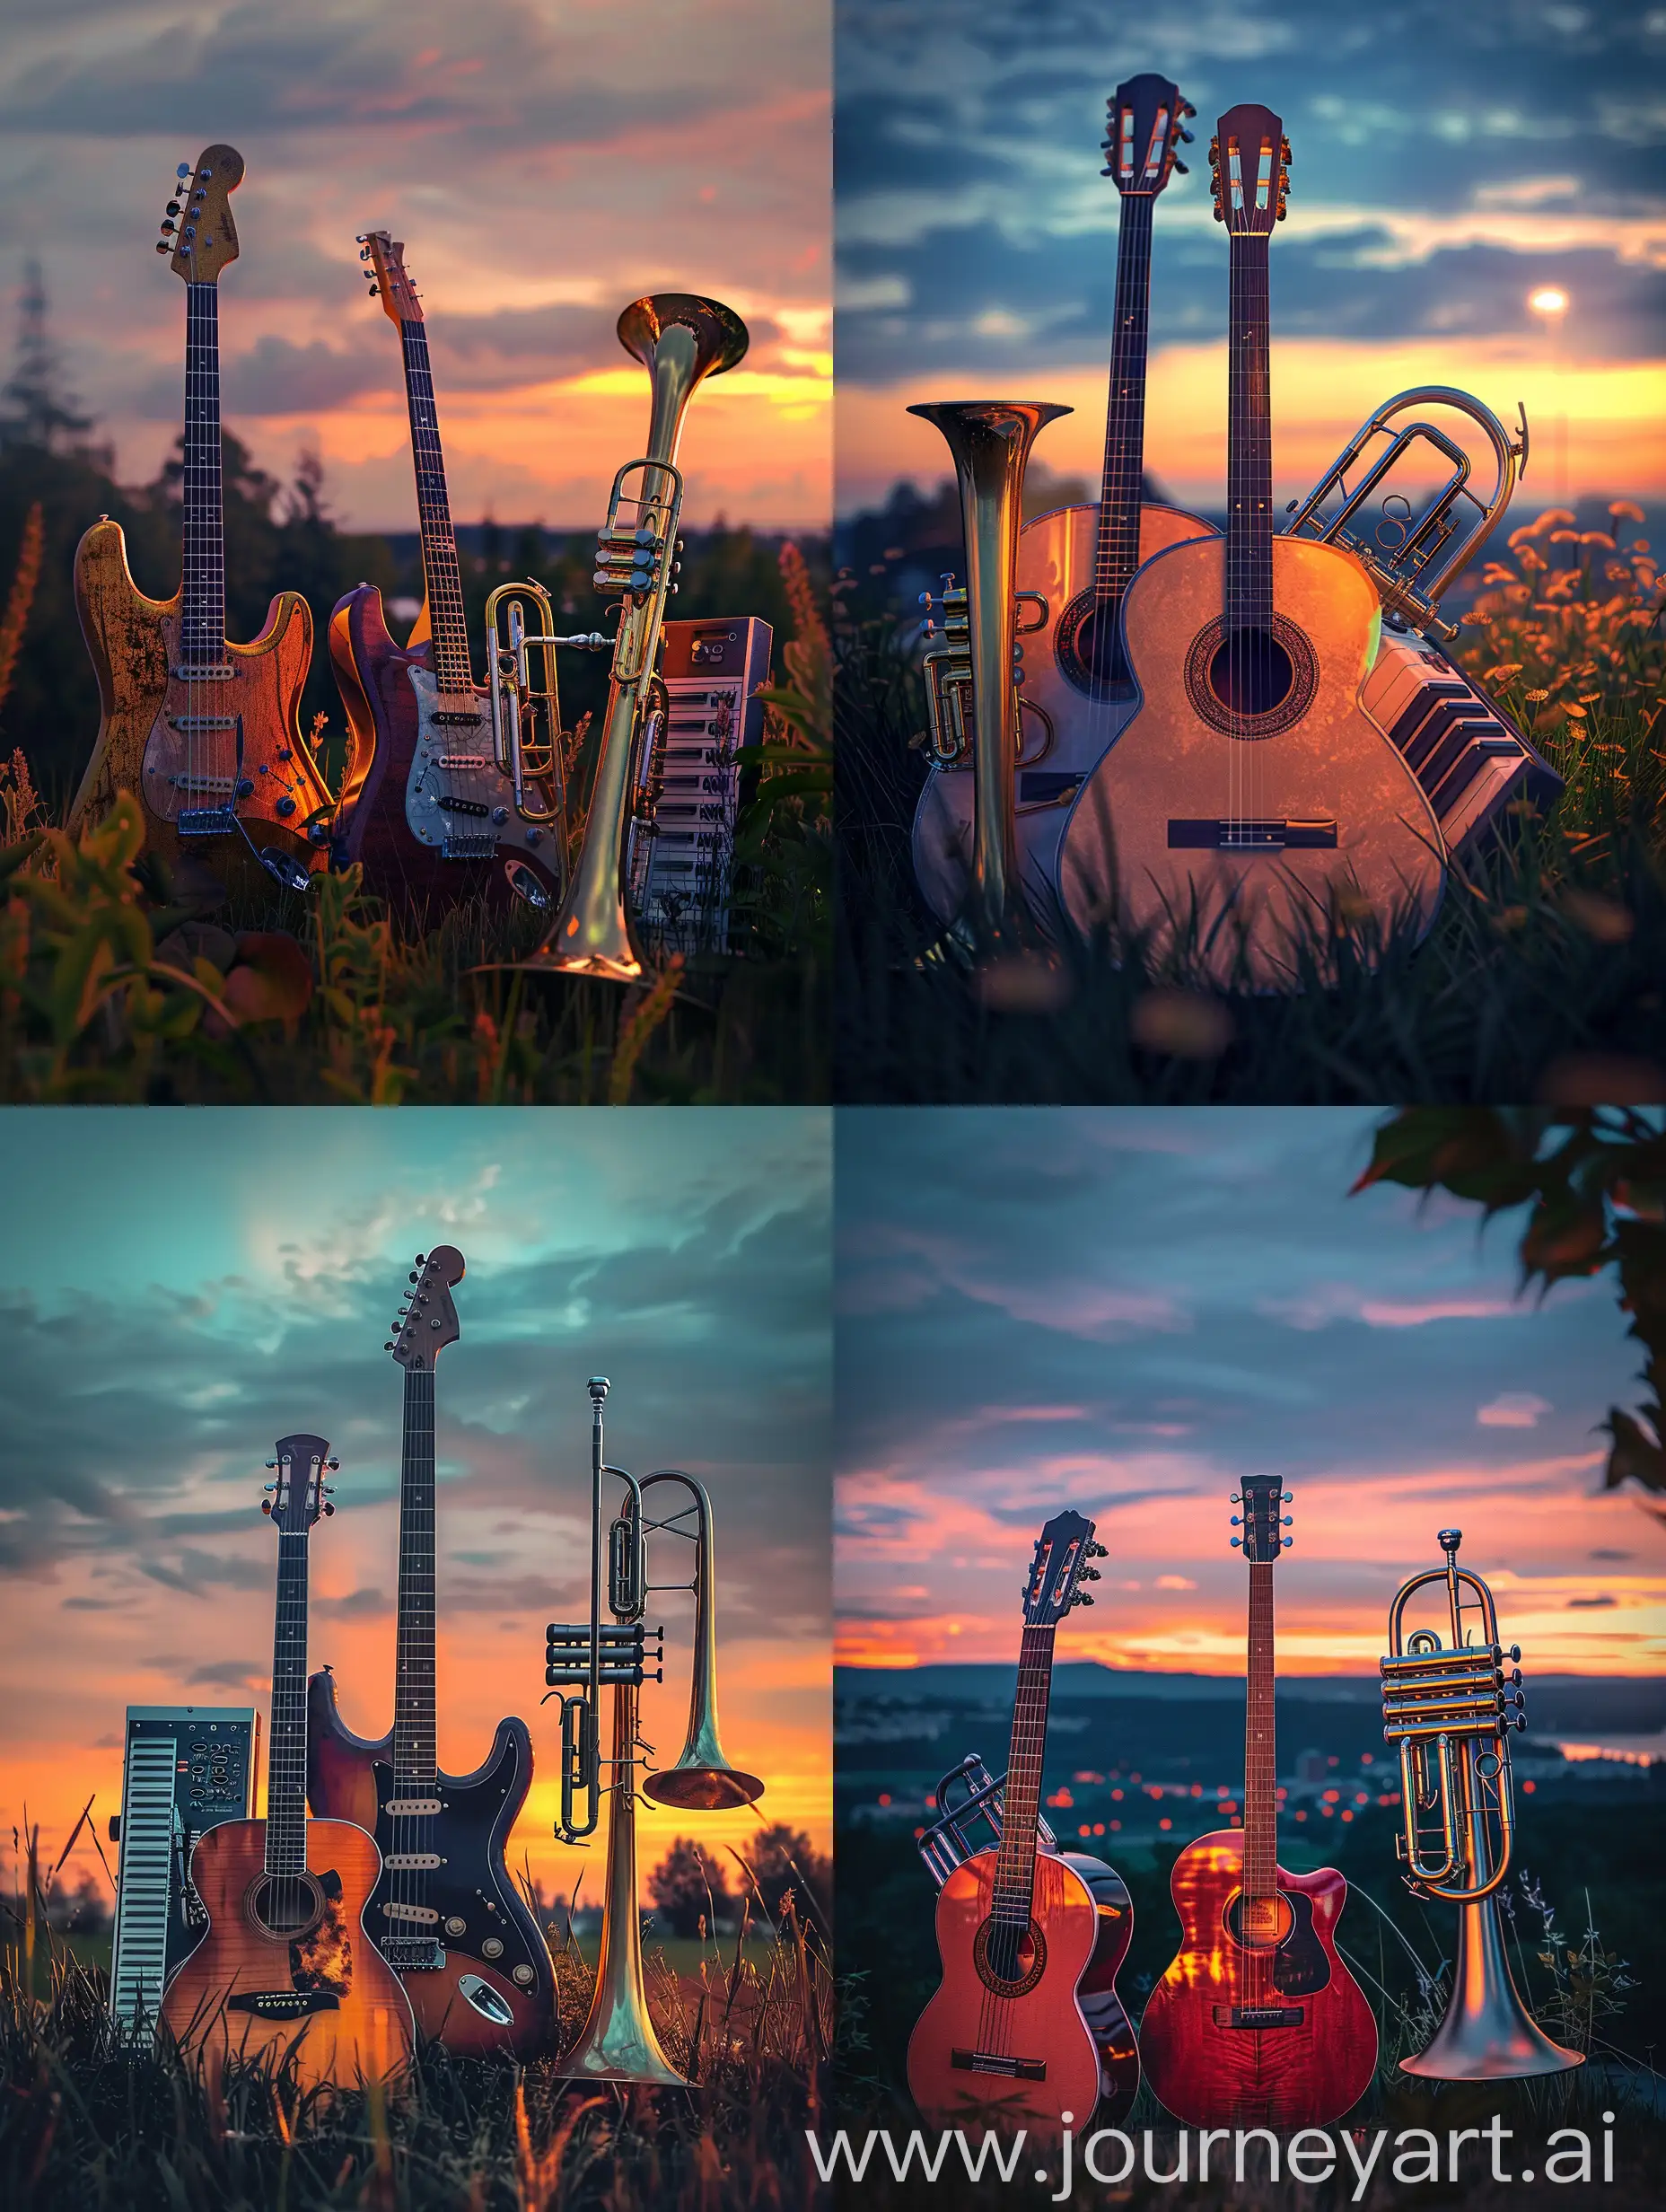 Create a realistic image of 1 guitar, 1 synthesizer, 1 trumpet and 1 trombone standing together against the backdrop of a summer evening. Make it look like a cool concert poster